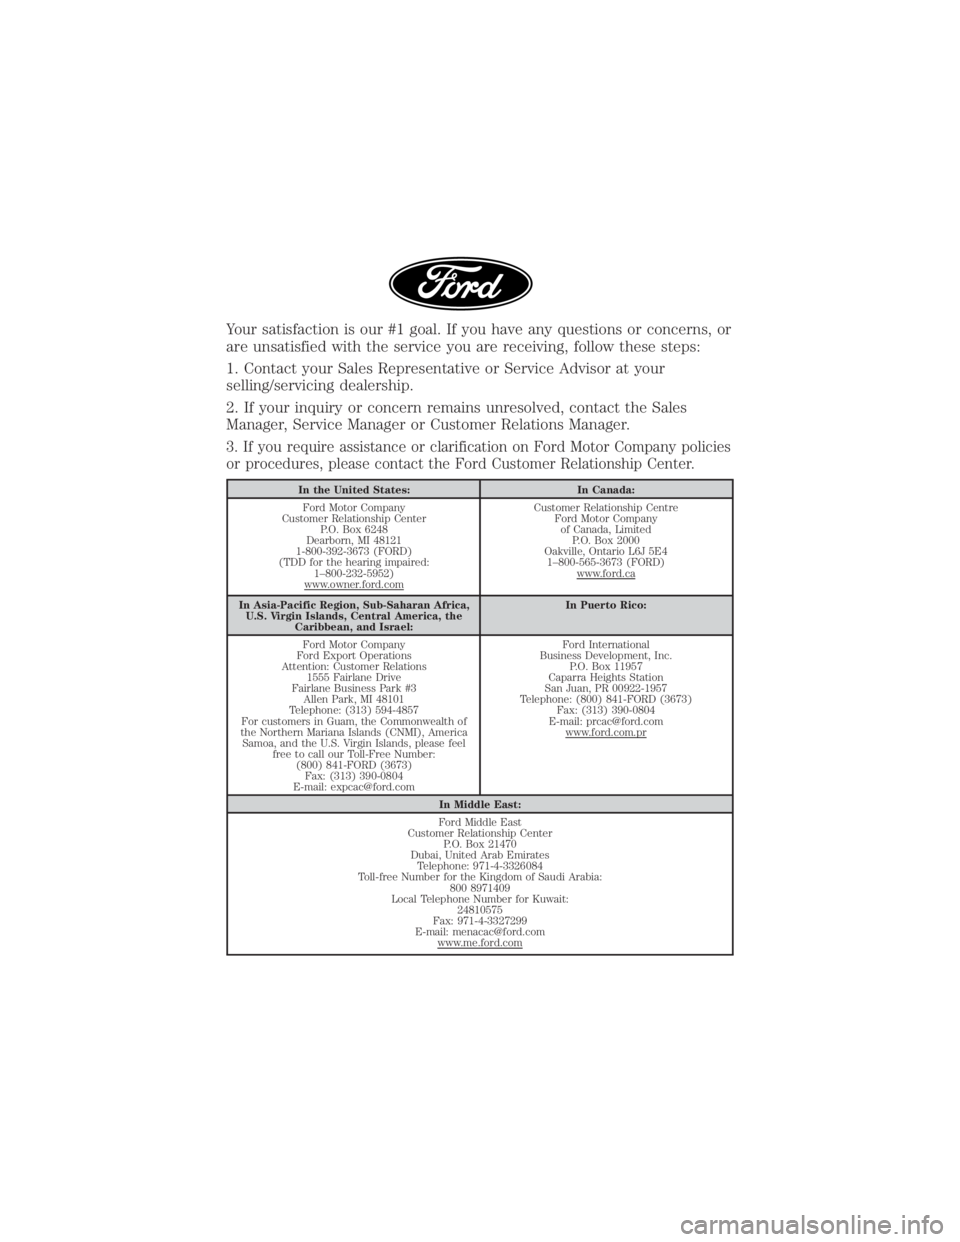 FORD EDGE 2019  Warranty Guide Your satisfaction is our #1 goal. If you have any questions or concerns, or
are unsatisfied with the service you are receiving, follow these steps:
1. Contact your Sales Representative or Service Advi